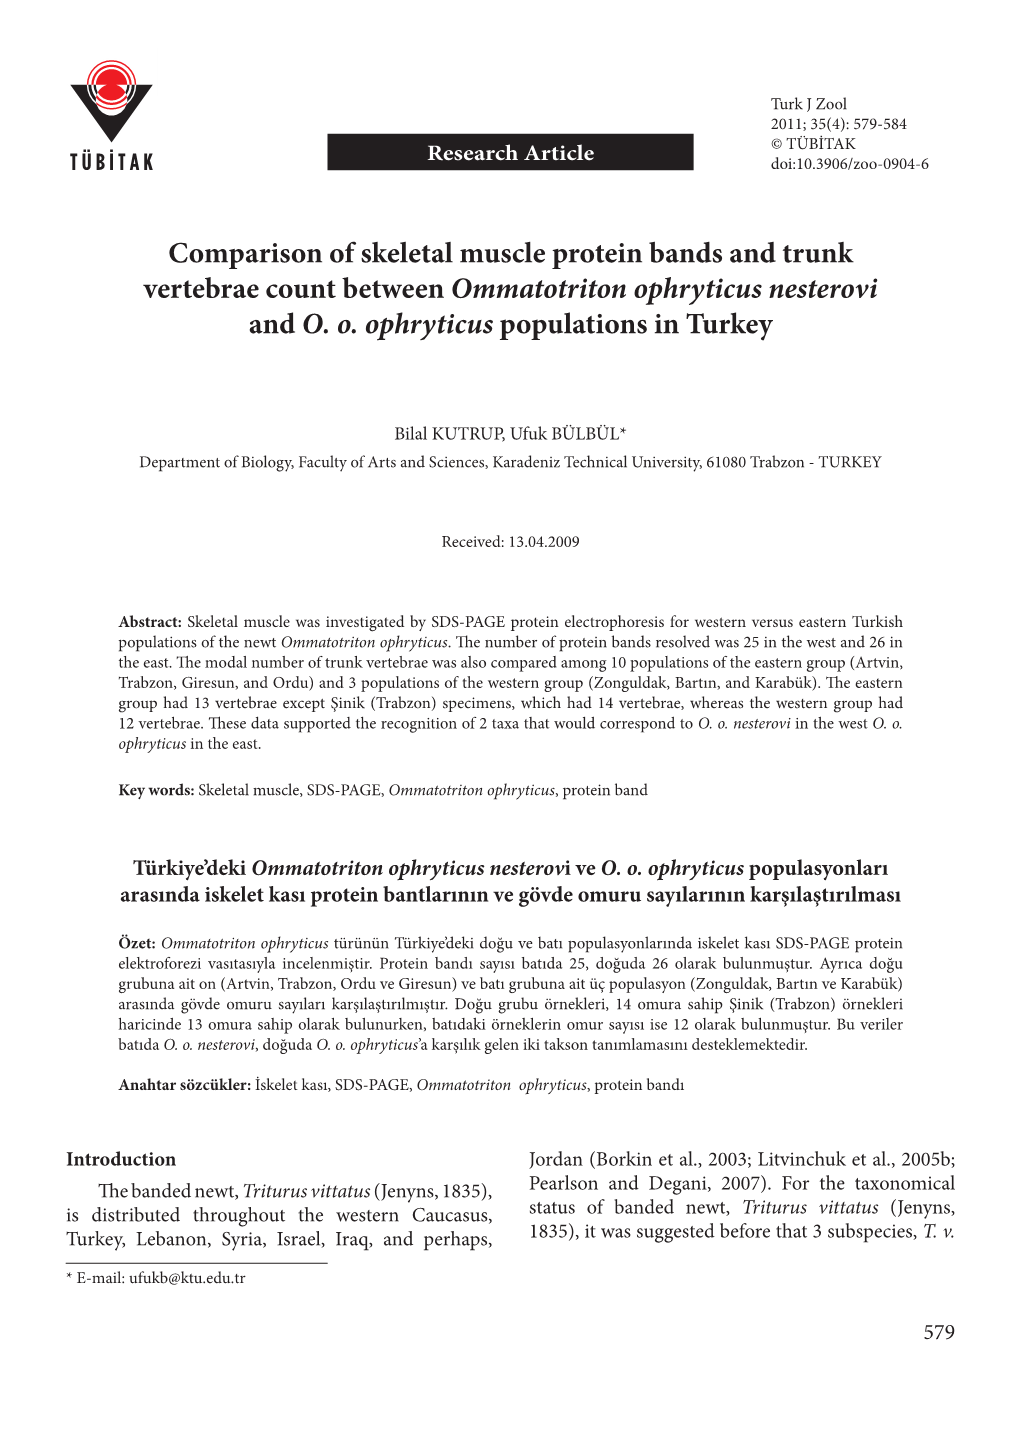 Comparison of Skeletal Muscle Protein Bands and Trunk Vertebrae Count Between Ommatotriton Ophryticus Nesterovi and O